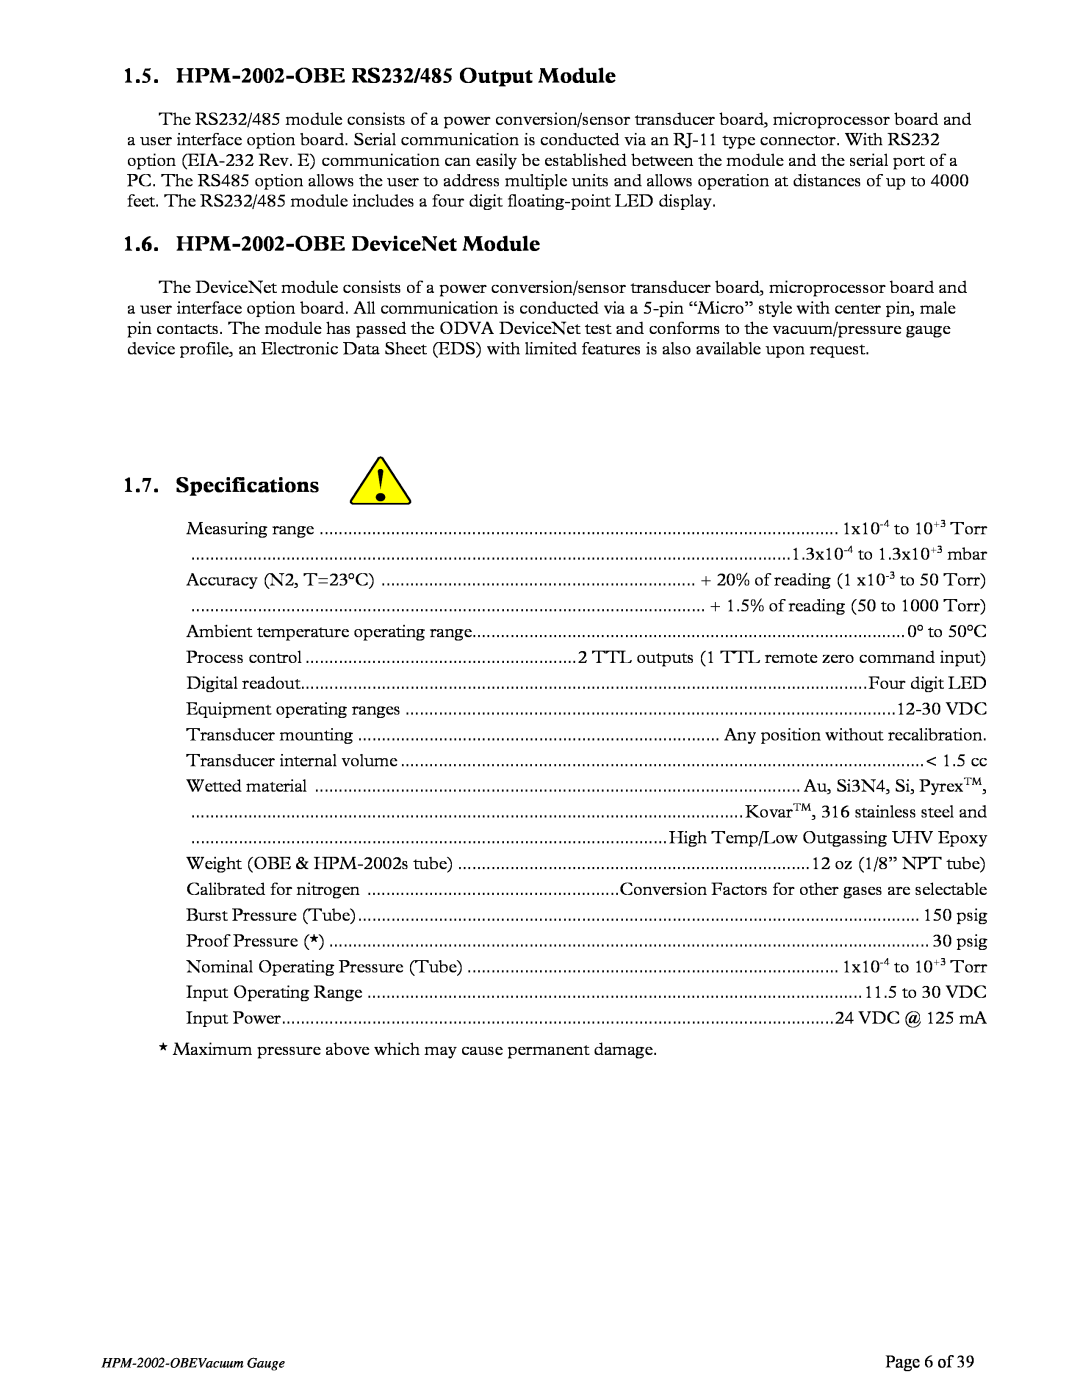 Teledyne HPM-2002-OBE RS232/485 Output Module, HPM-2002-OBE DeviceNet Module, Specifications, Page 6 of 